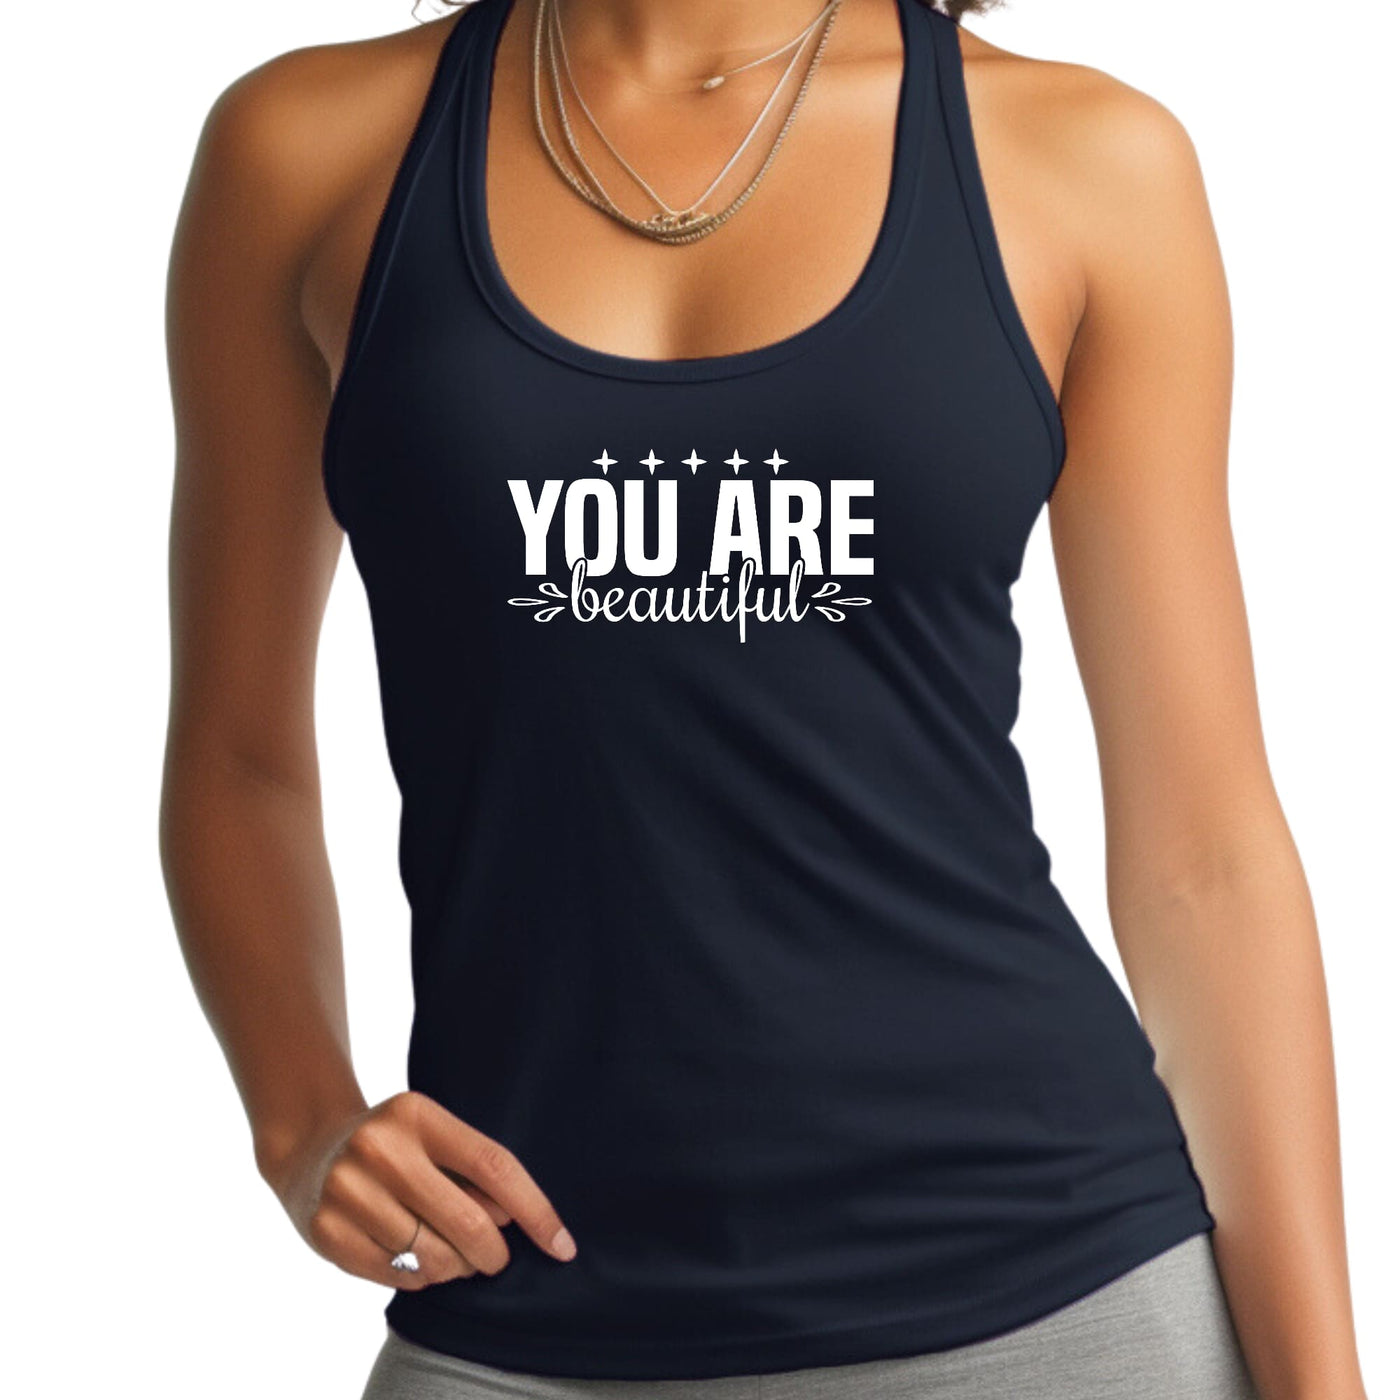 Womens Fitness Tank Top Graphic T-shirt You Are Beautiful Inspiration - Womens